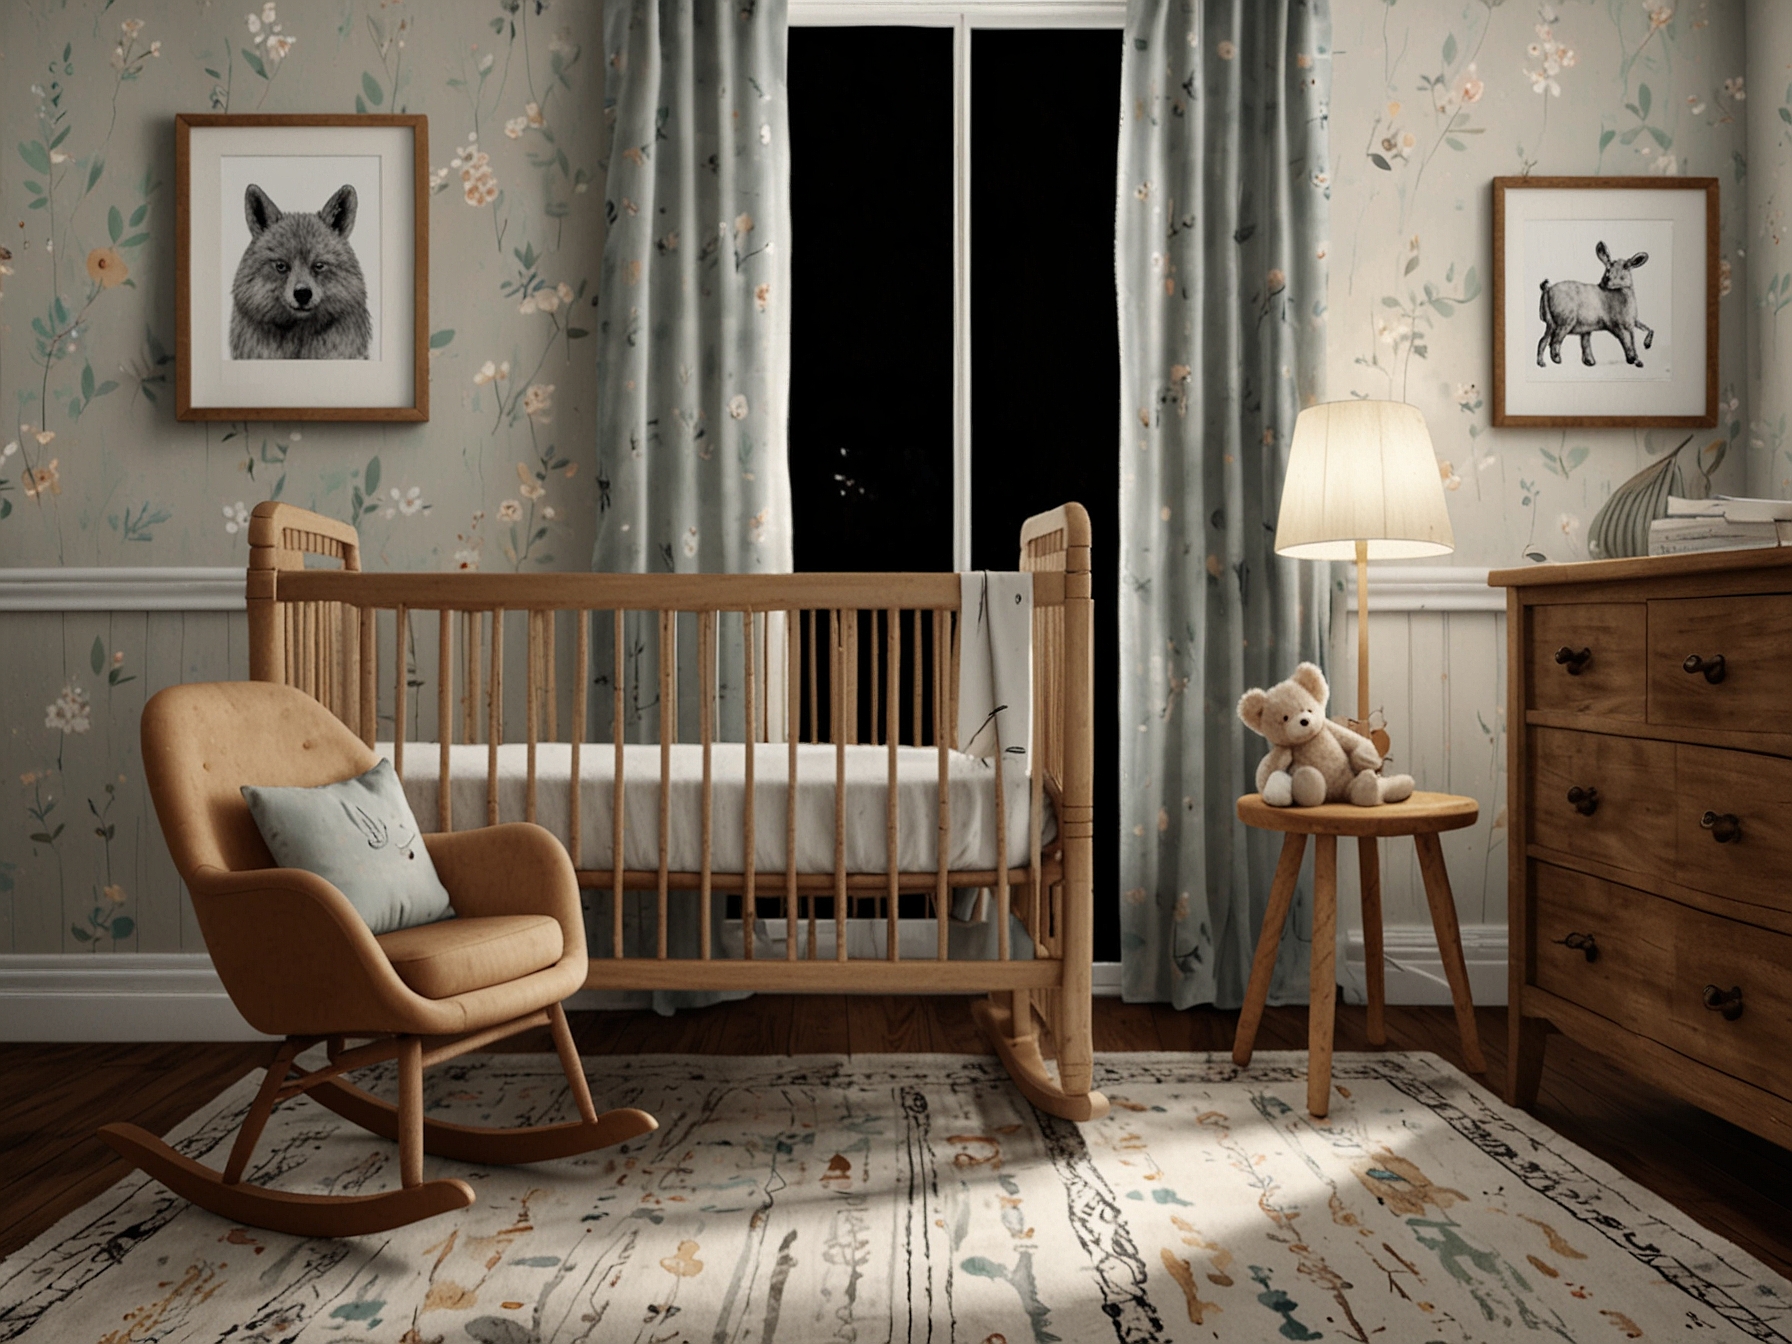 The stylish and cozy nursery features a classic wooden crib, plush animal toys, and a rocking chair, reflecting the couple's thoughtful preparation for their upcoming baby's arrival.